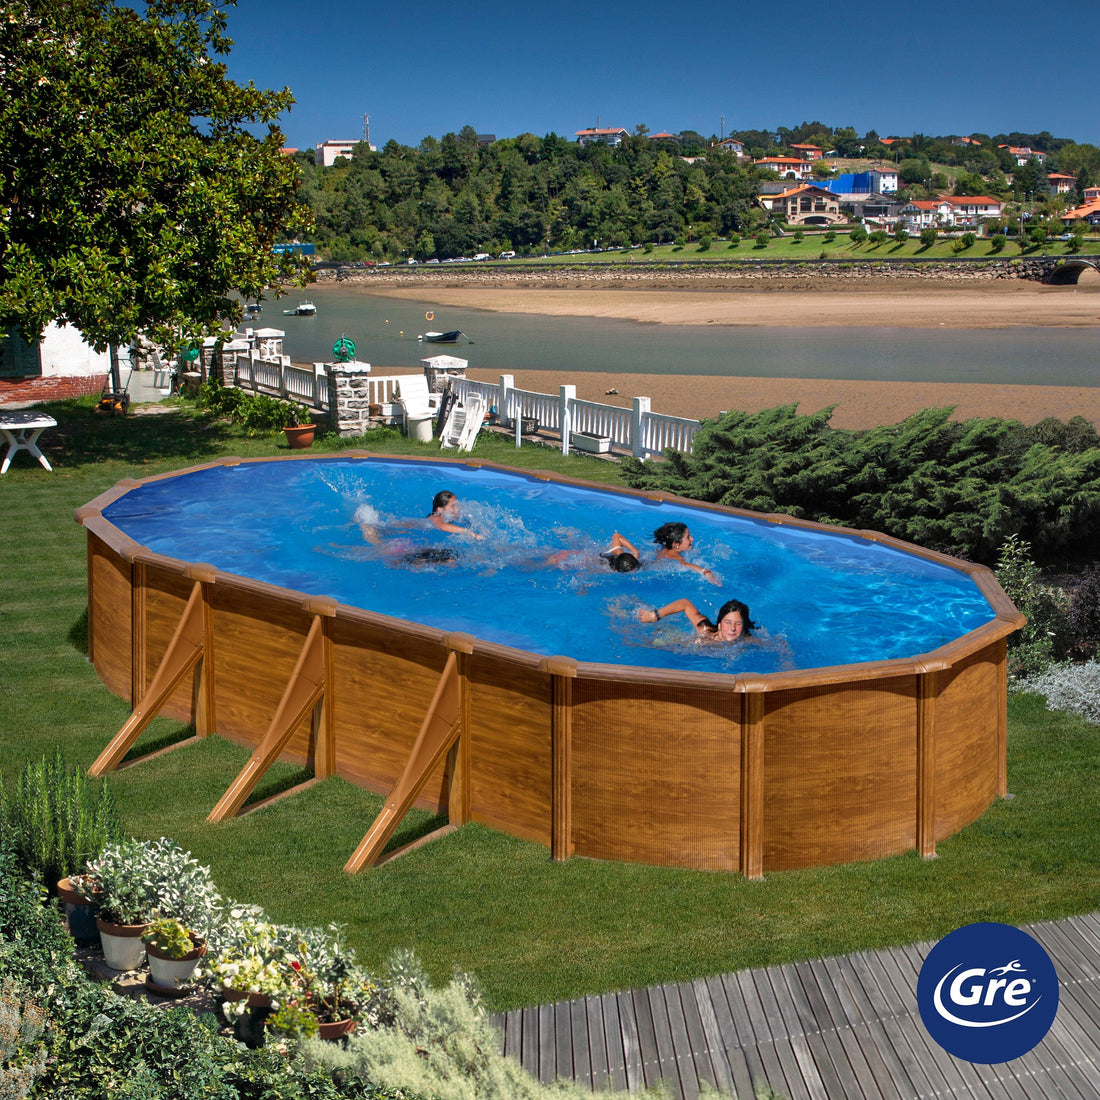 OVAL POOL WITH WOODEN DECORATION 730X375 H 120 WITH SAND FILTER